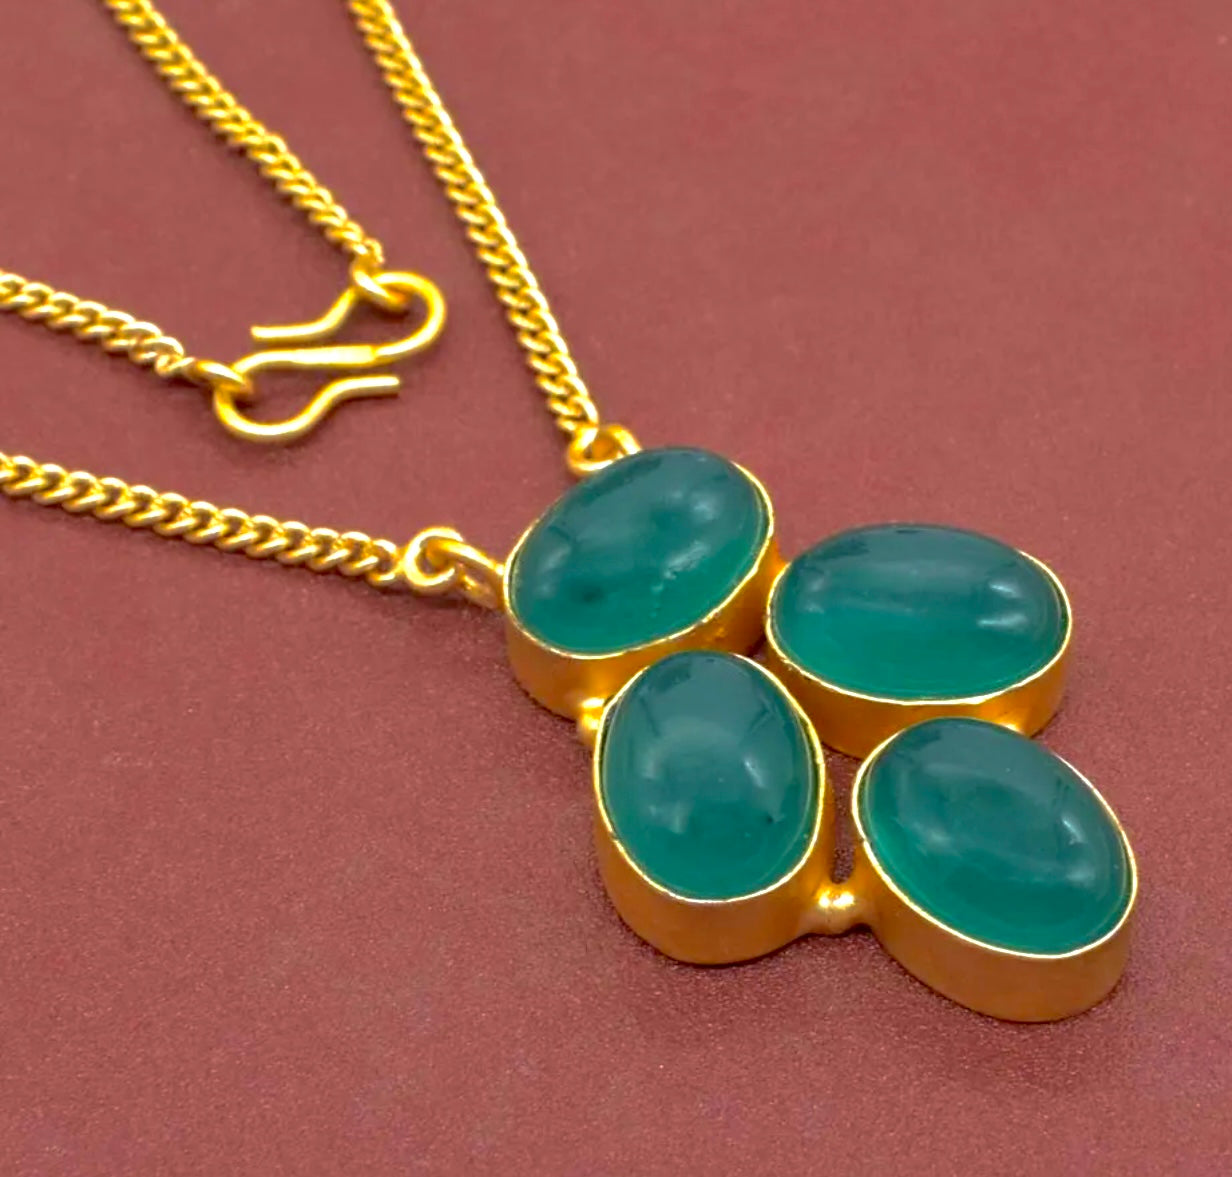 Gold Vermeil and Green Onyx Gemstone Pendant Necklace 18"